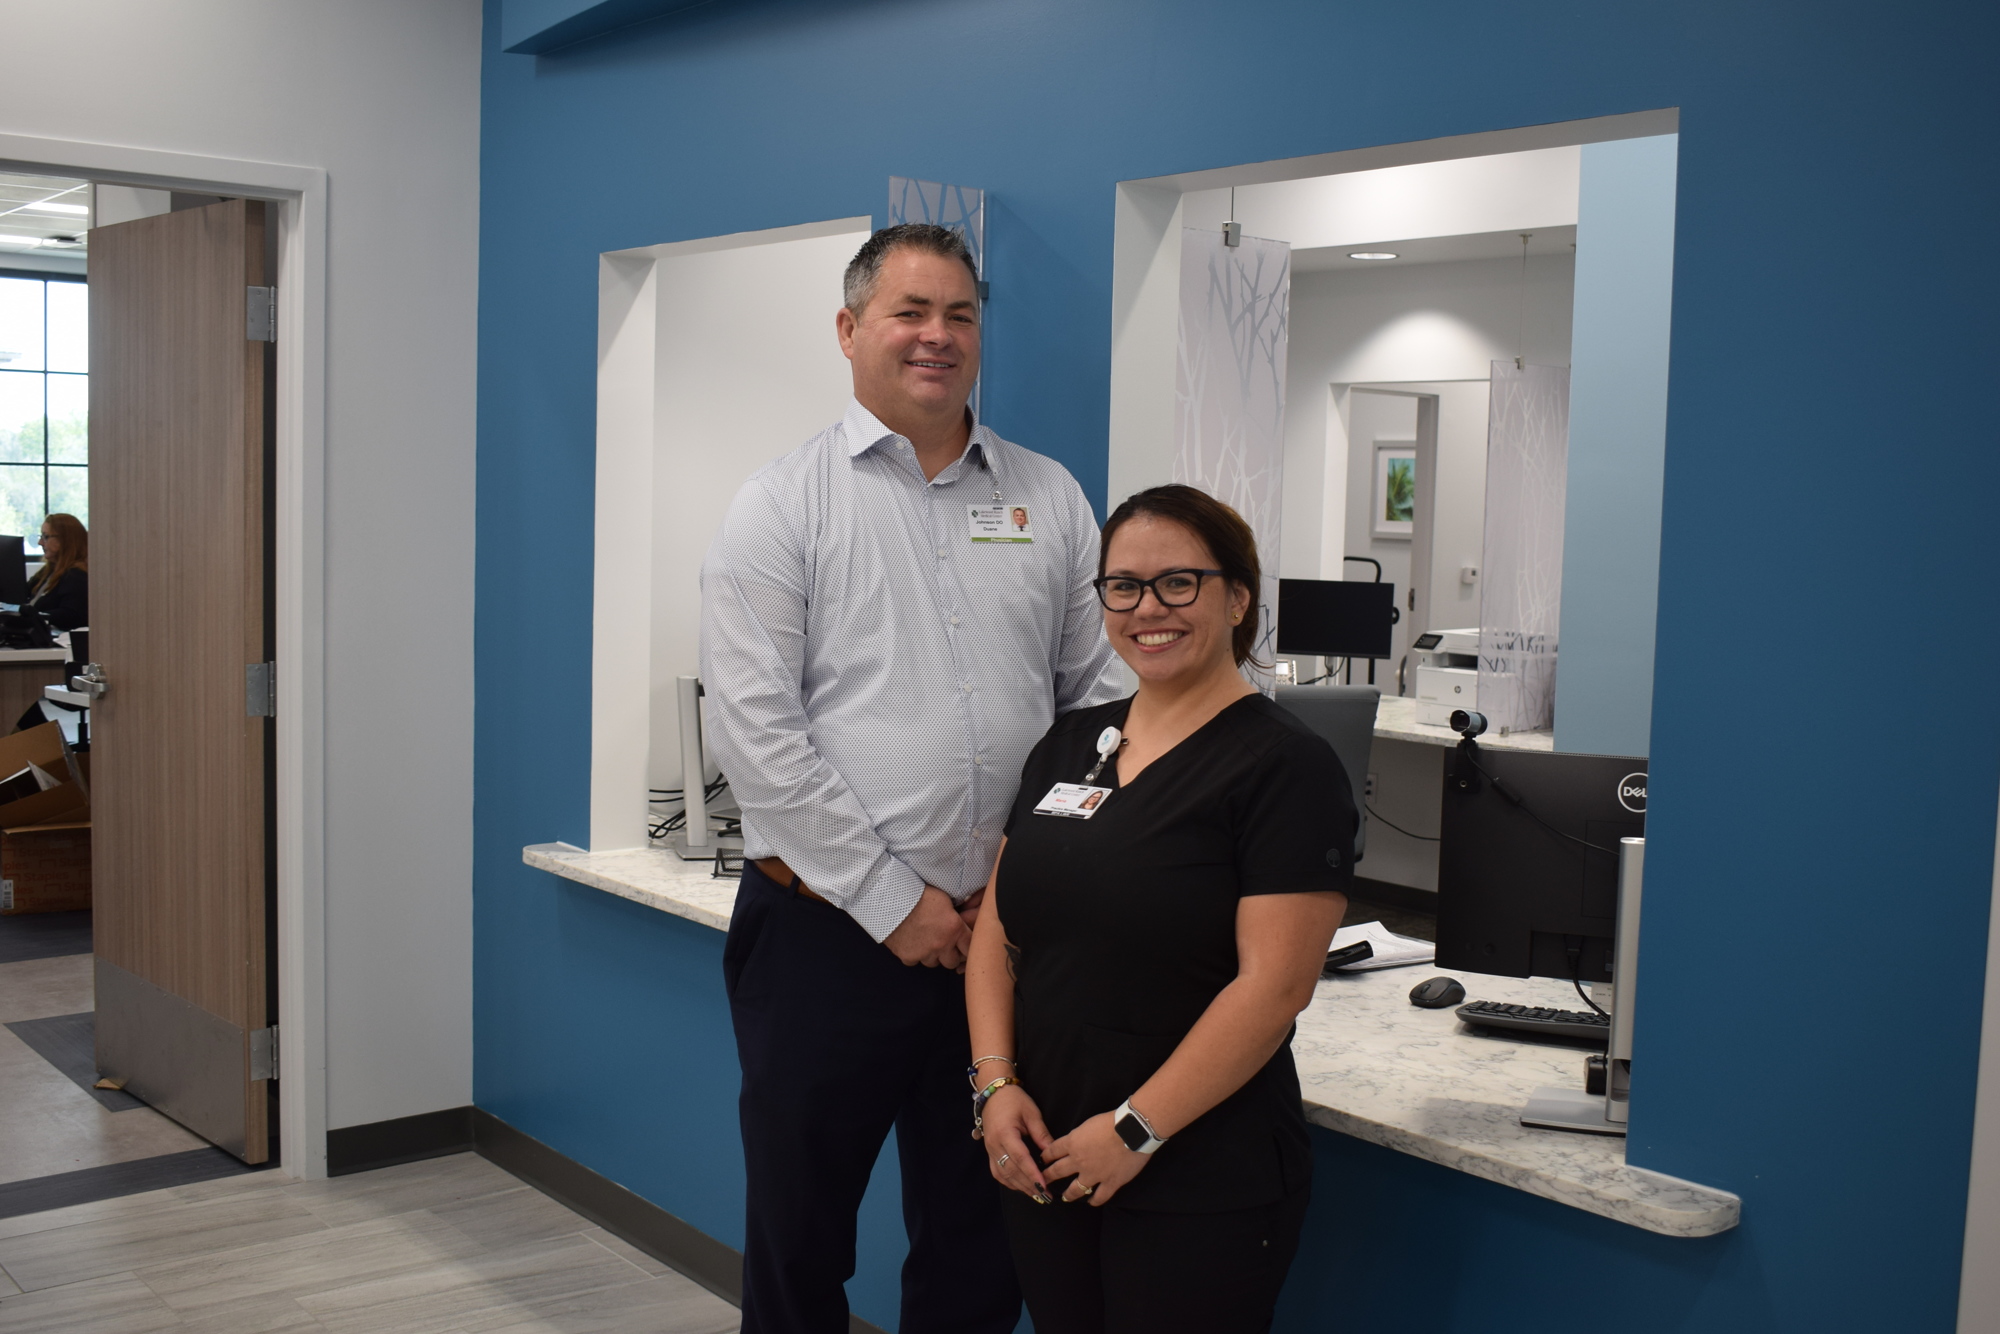 Dr. Duane Johnson and Office Manager Maria Patino greeted patients last week as the first business open at Waterside Place.